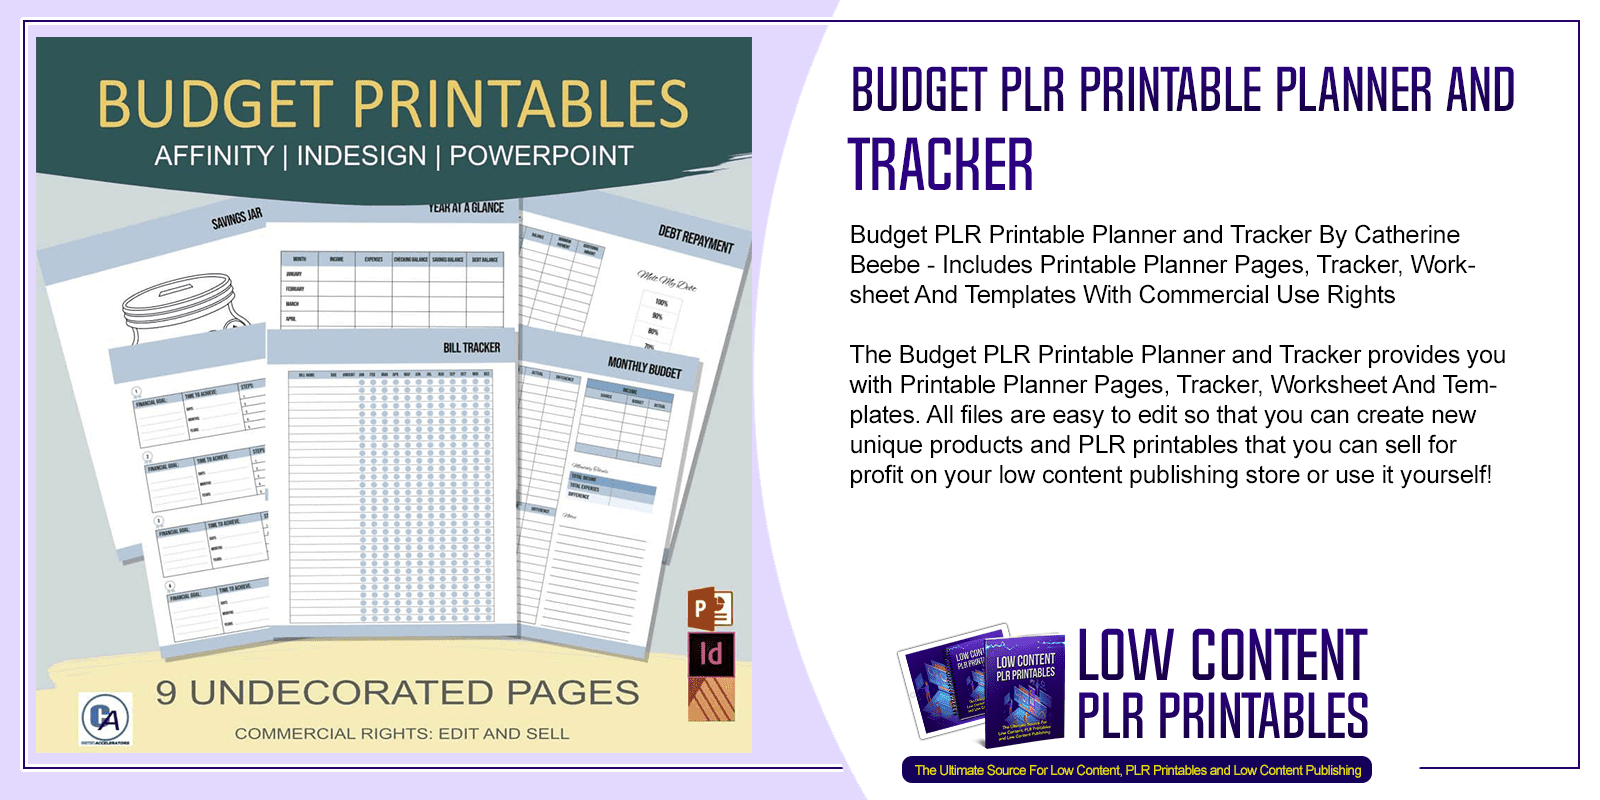 Budget PLR Printable Planner and Tracker